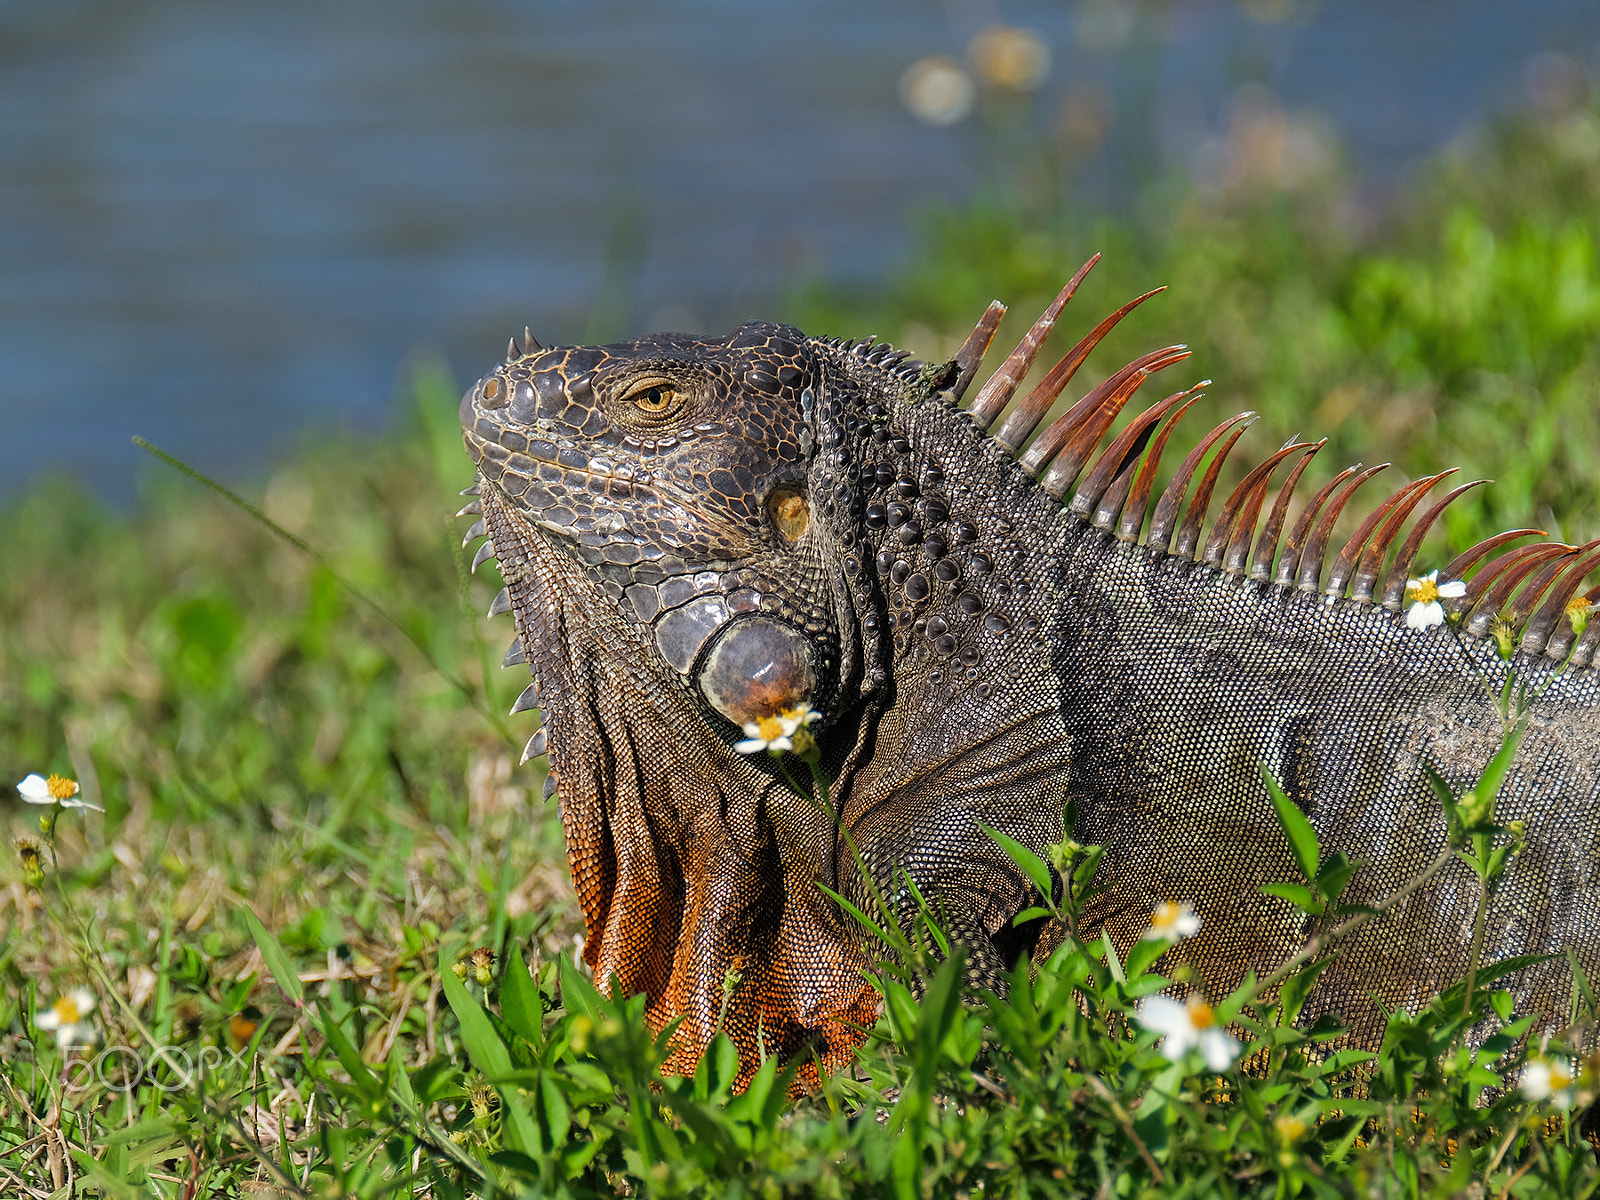 XF100-400mmF4.5-5.6 R LM OIS WR + 1.4x sample photo. Male green iguana breeding colors and neck dewlap photography